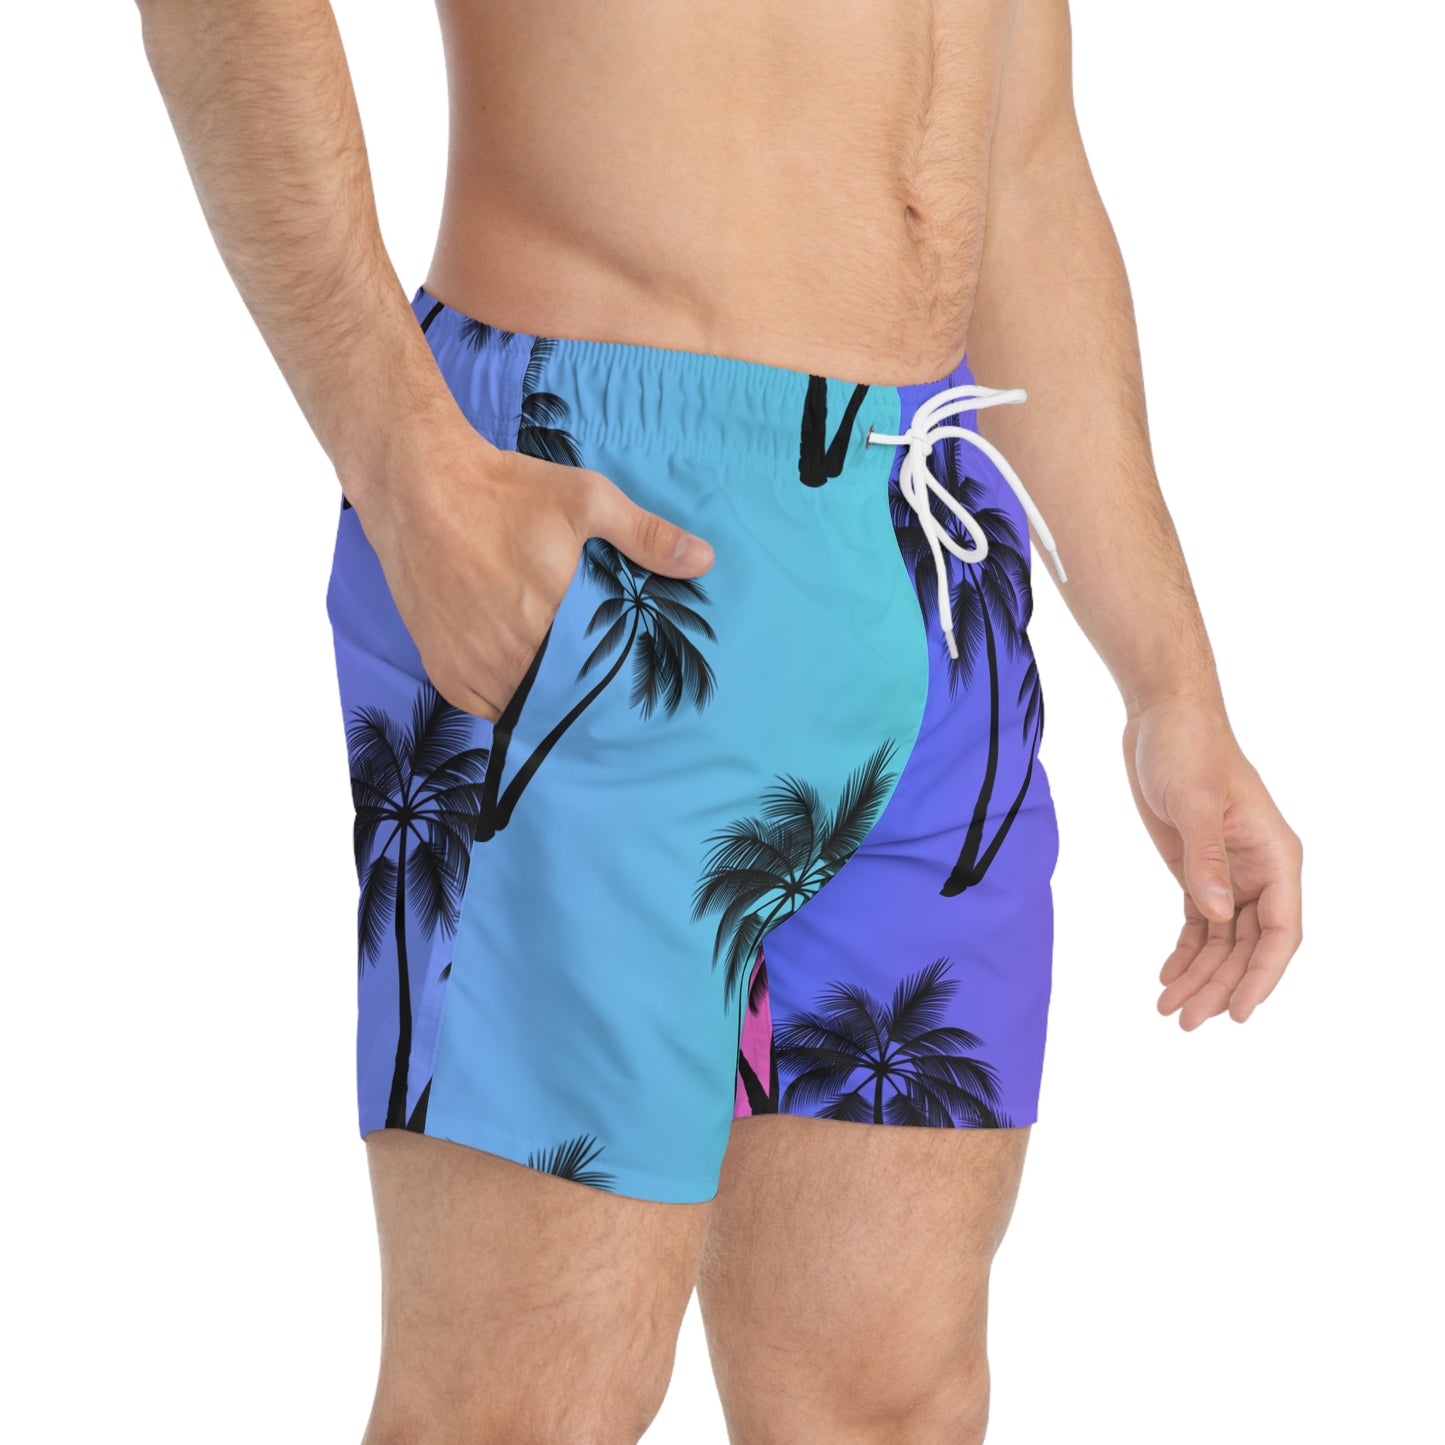 Mens Palm Swim Trunks/ His and Hers